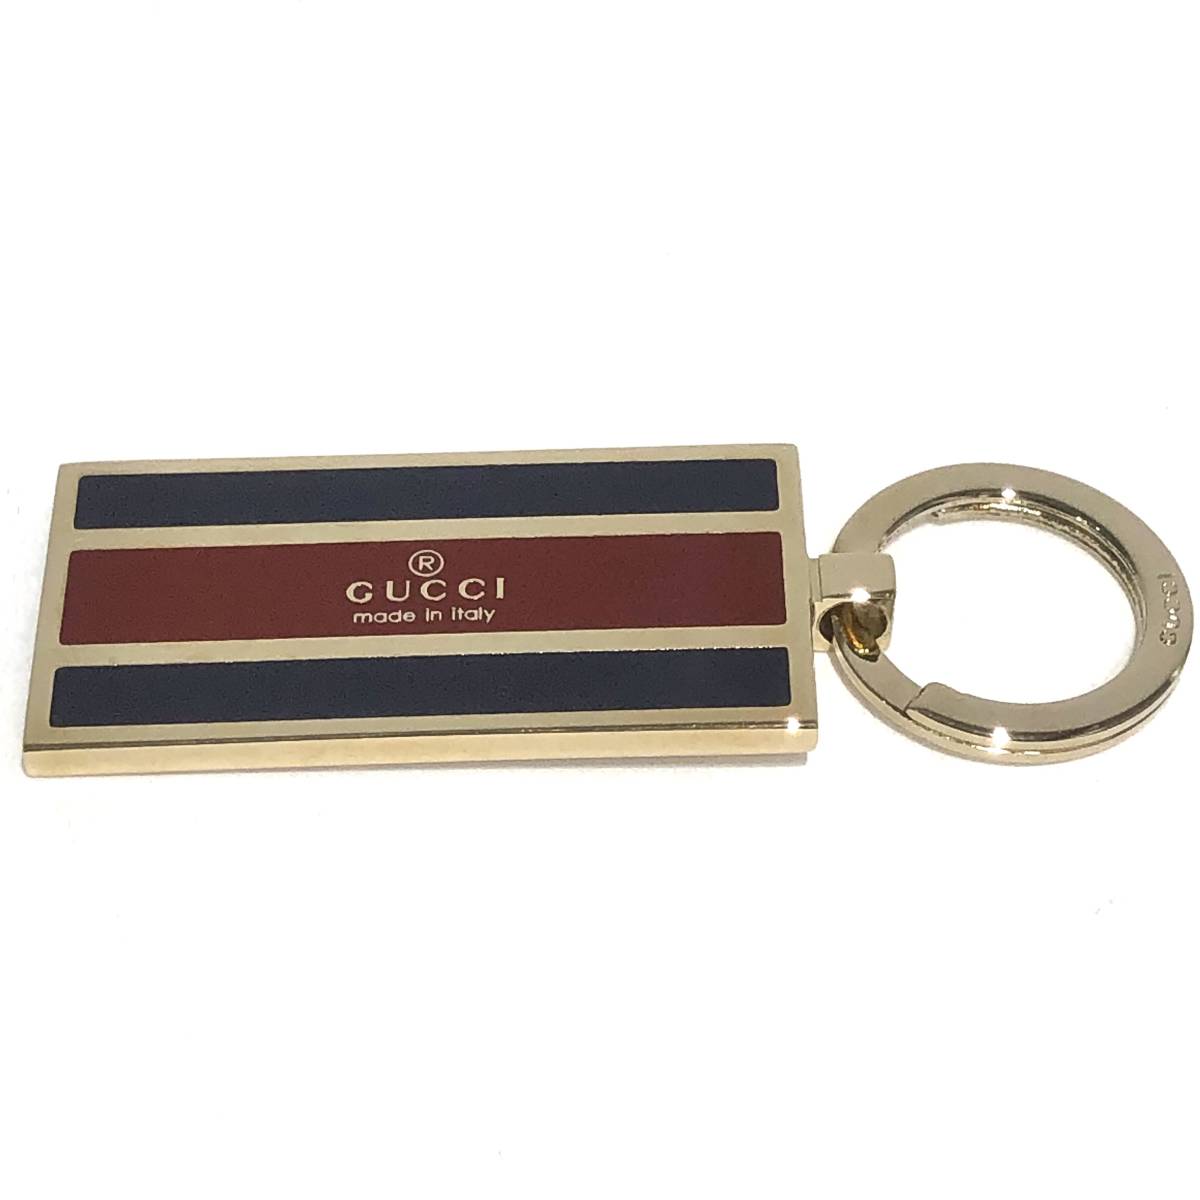  beautiful goods Gucci GUCCI key ring key holder Sherry line Vintage box attaching men's lady's man and woman use 